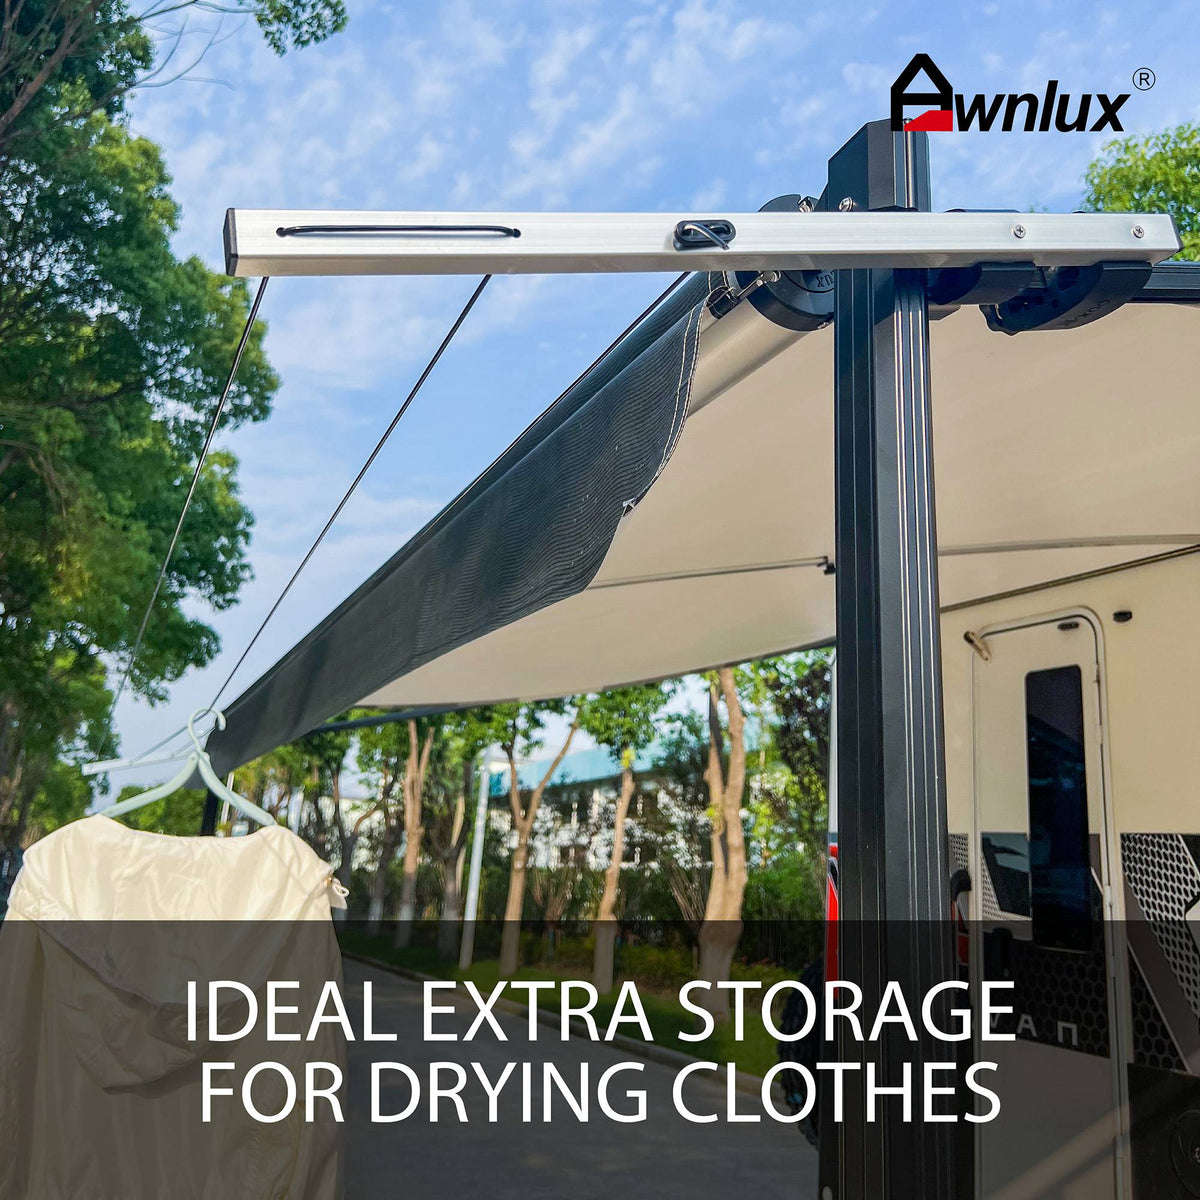 AWNLUX RV Camping Clothes hanger - AWNLUX